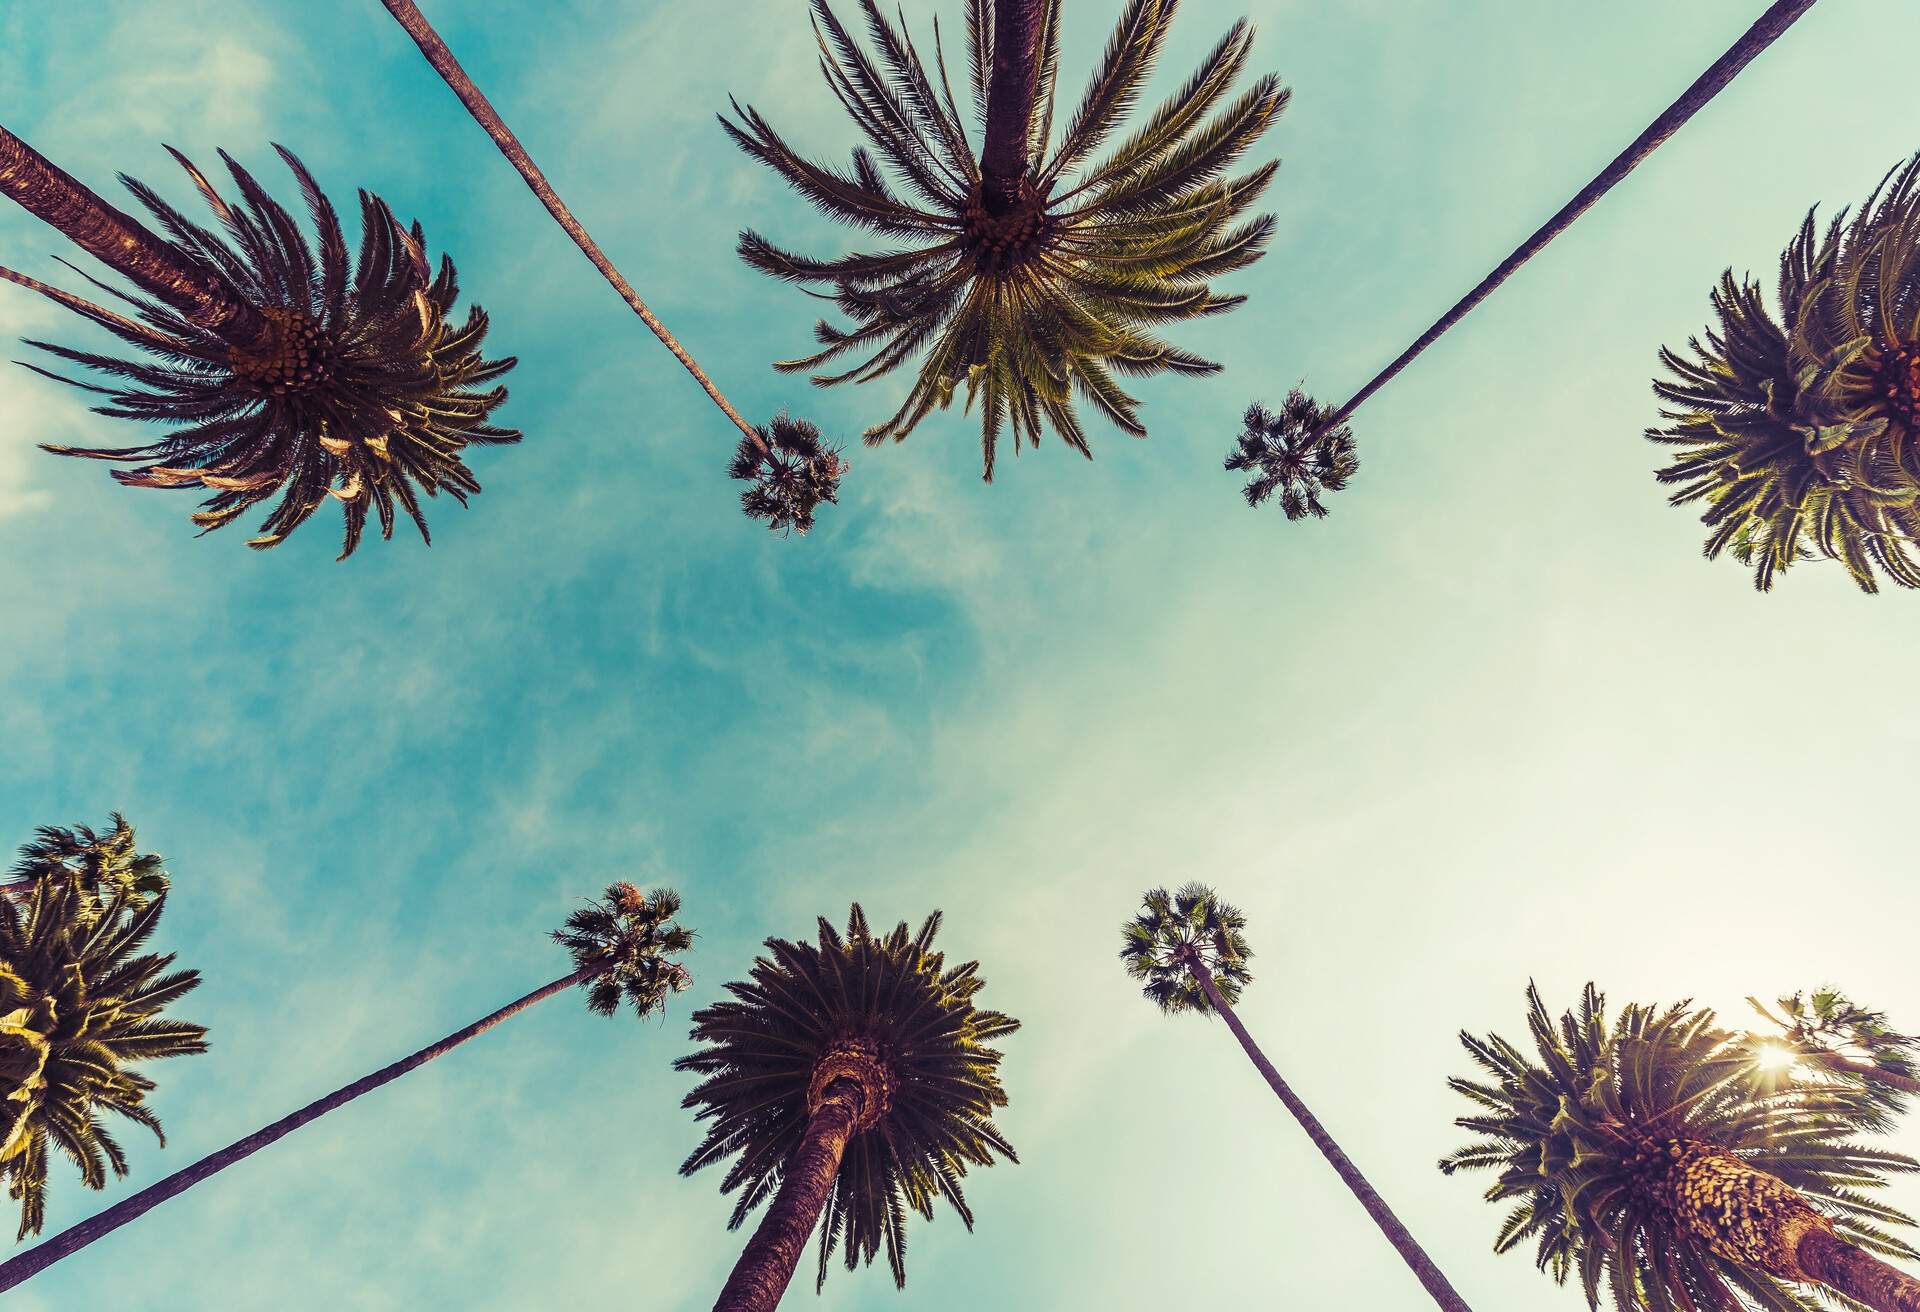 An upward view of tall and short palm trees from below protruding into the sky.